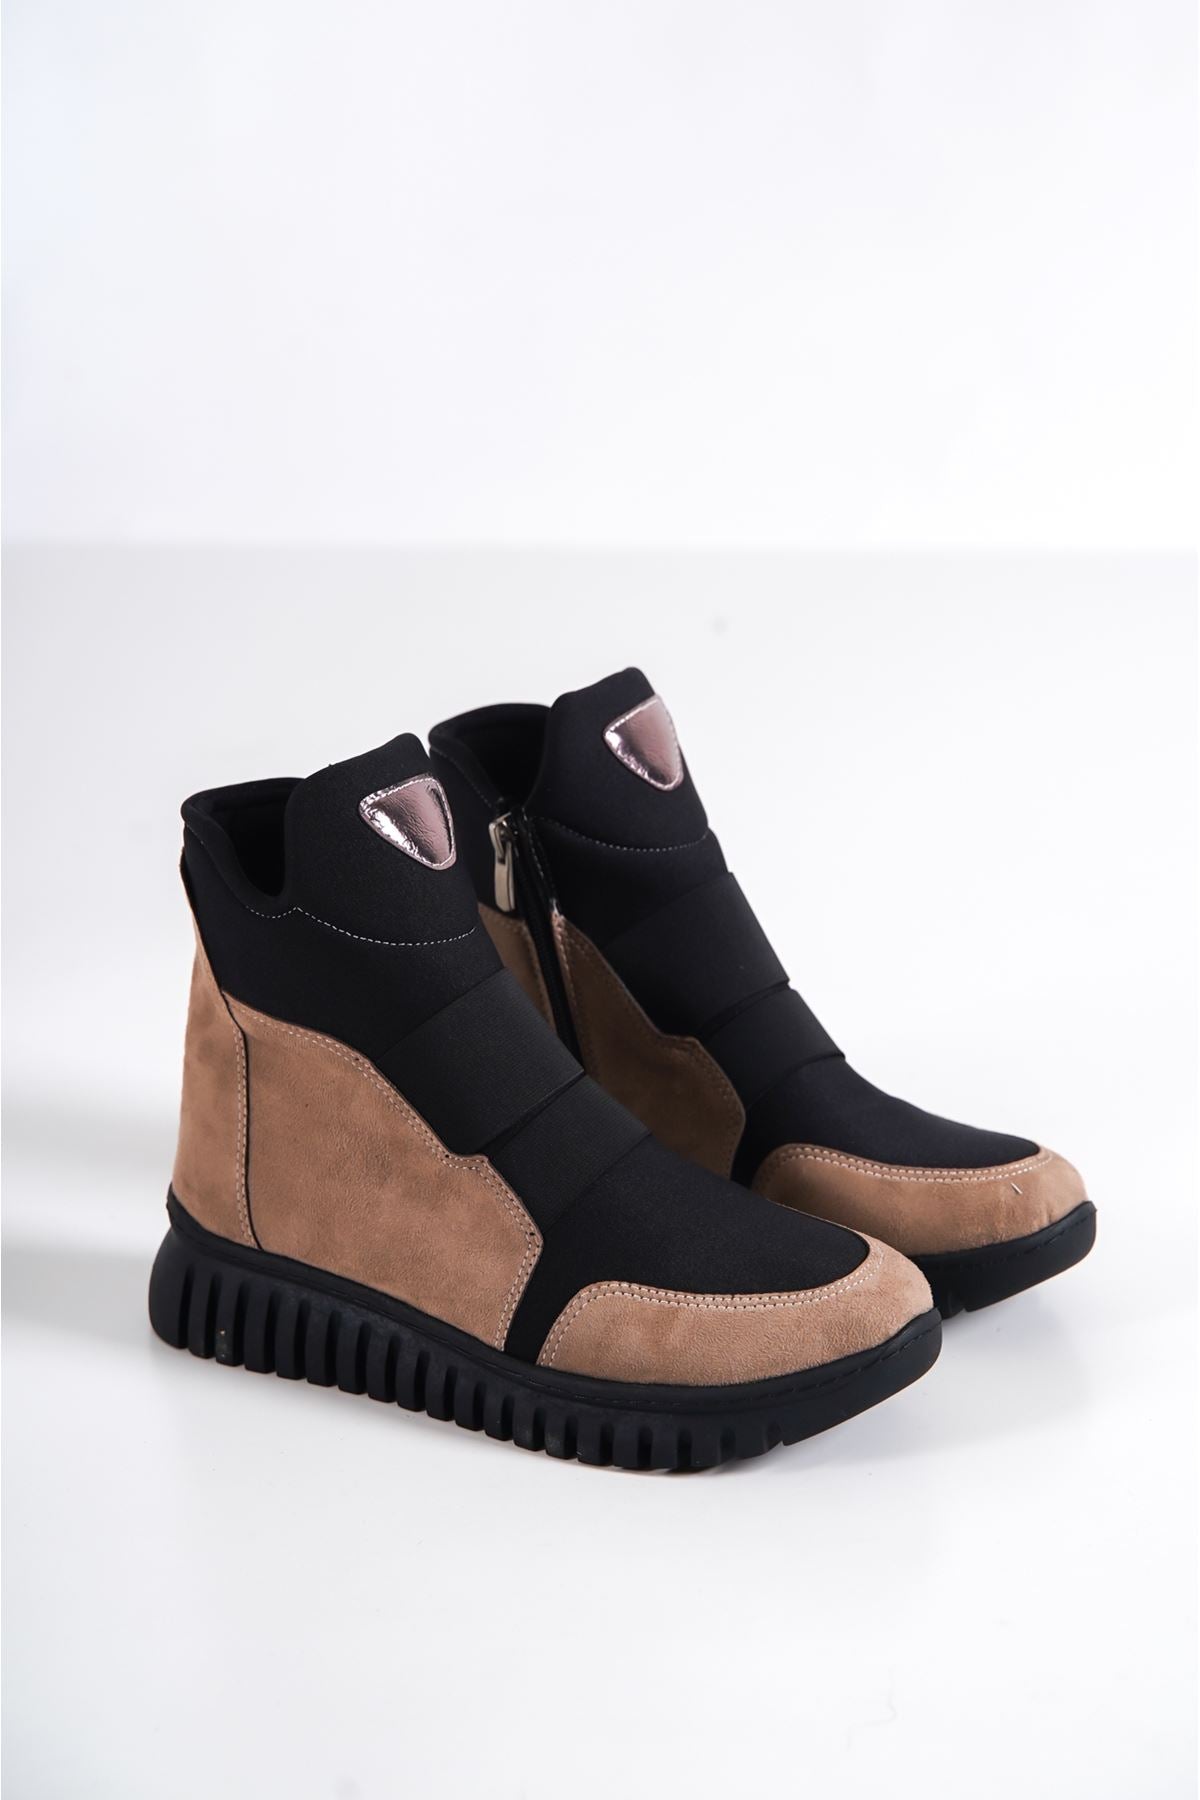 Women's Espina Suede Waterproof Rubber Band Boots Mink-Black - STREETMODE™